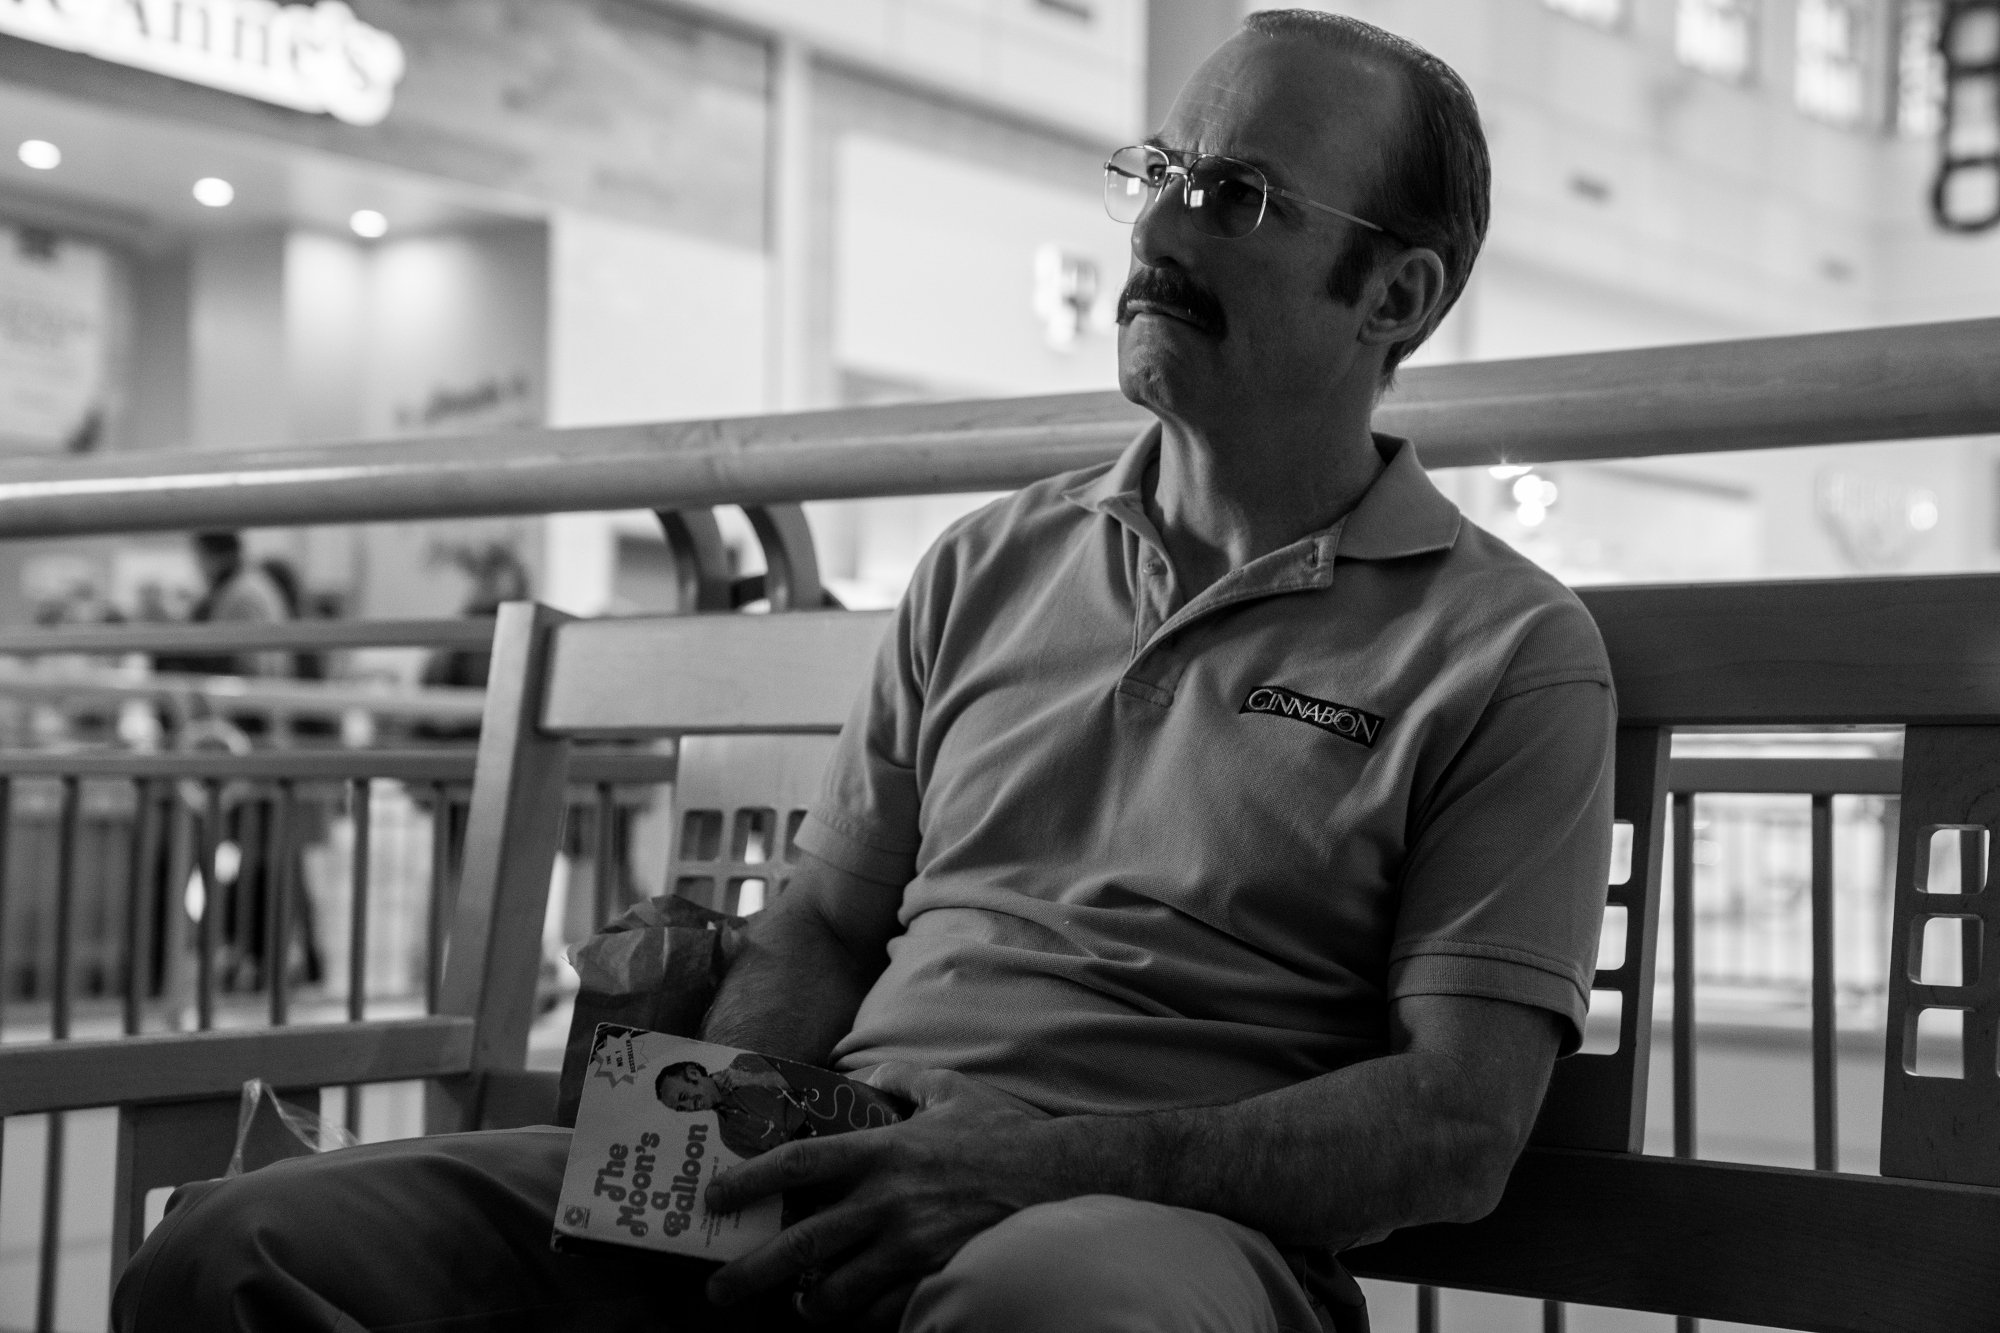 A black and white image of Bob Odenkirk in 'Better Call Saul' - He's playing an older version of Saul Goodman who is sitting on a bench